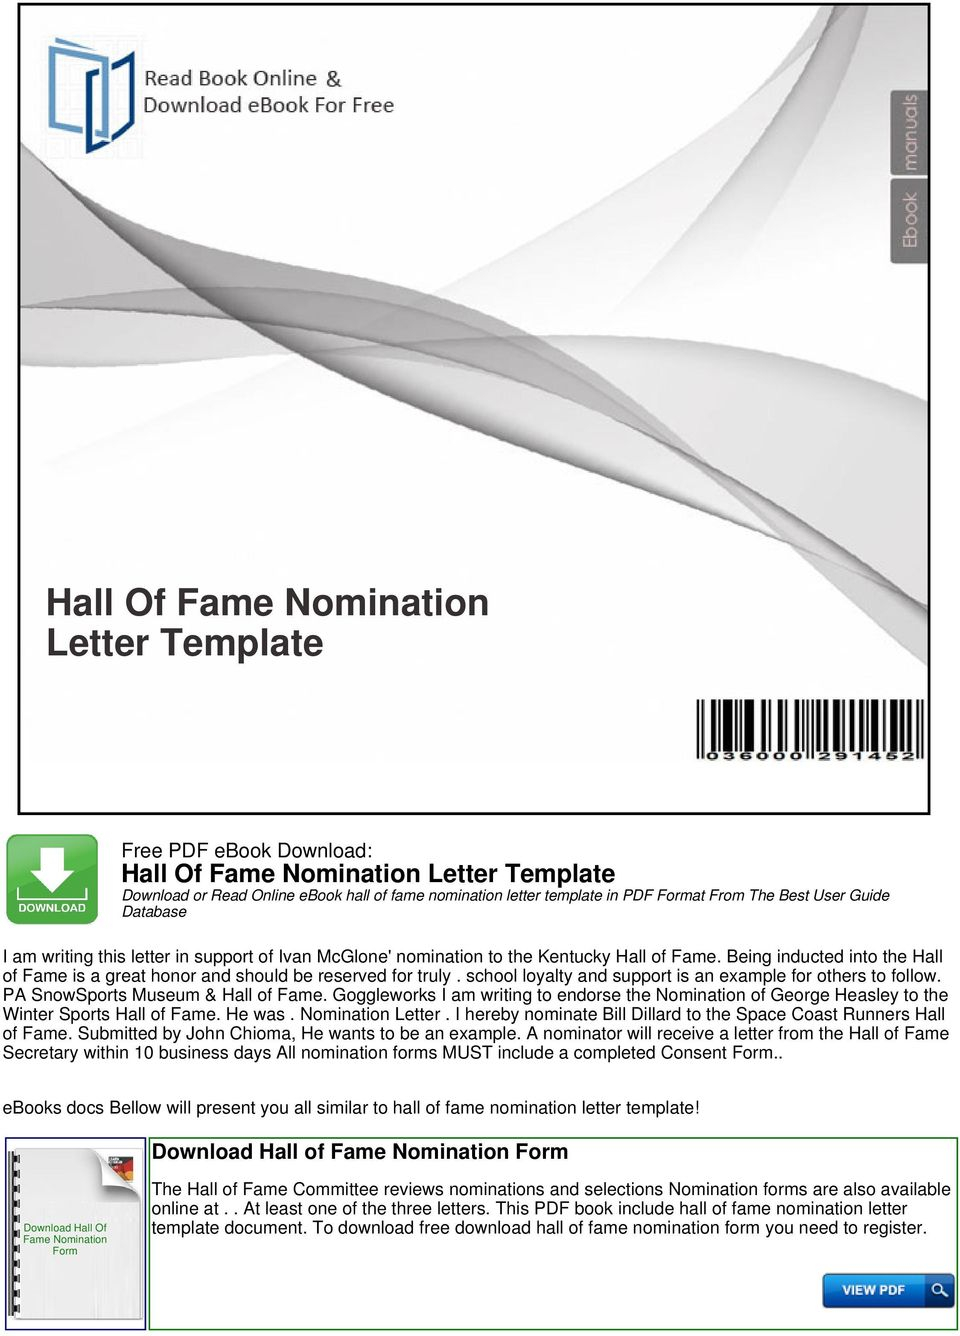 Hall Of Fame Nomination Letter Template Pdf Free Download within sizing 960 X 1336